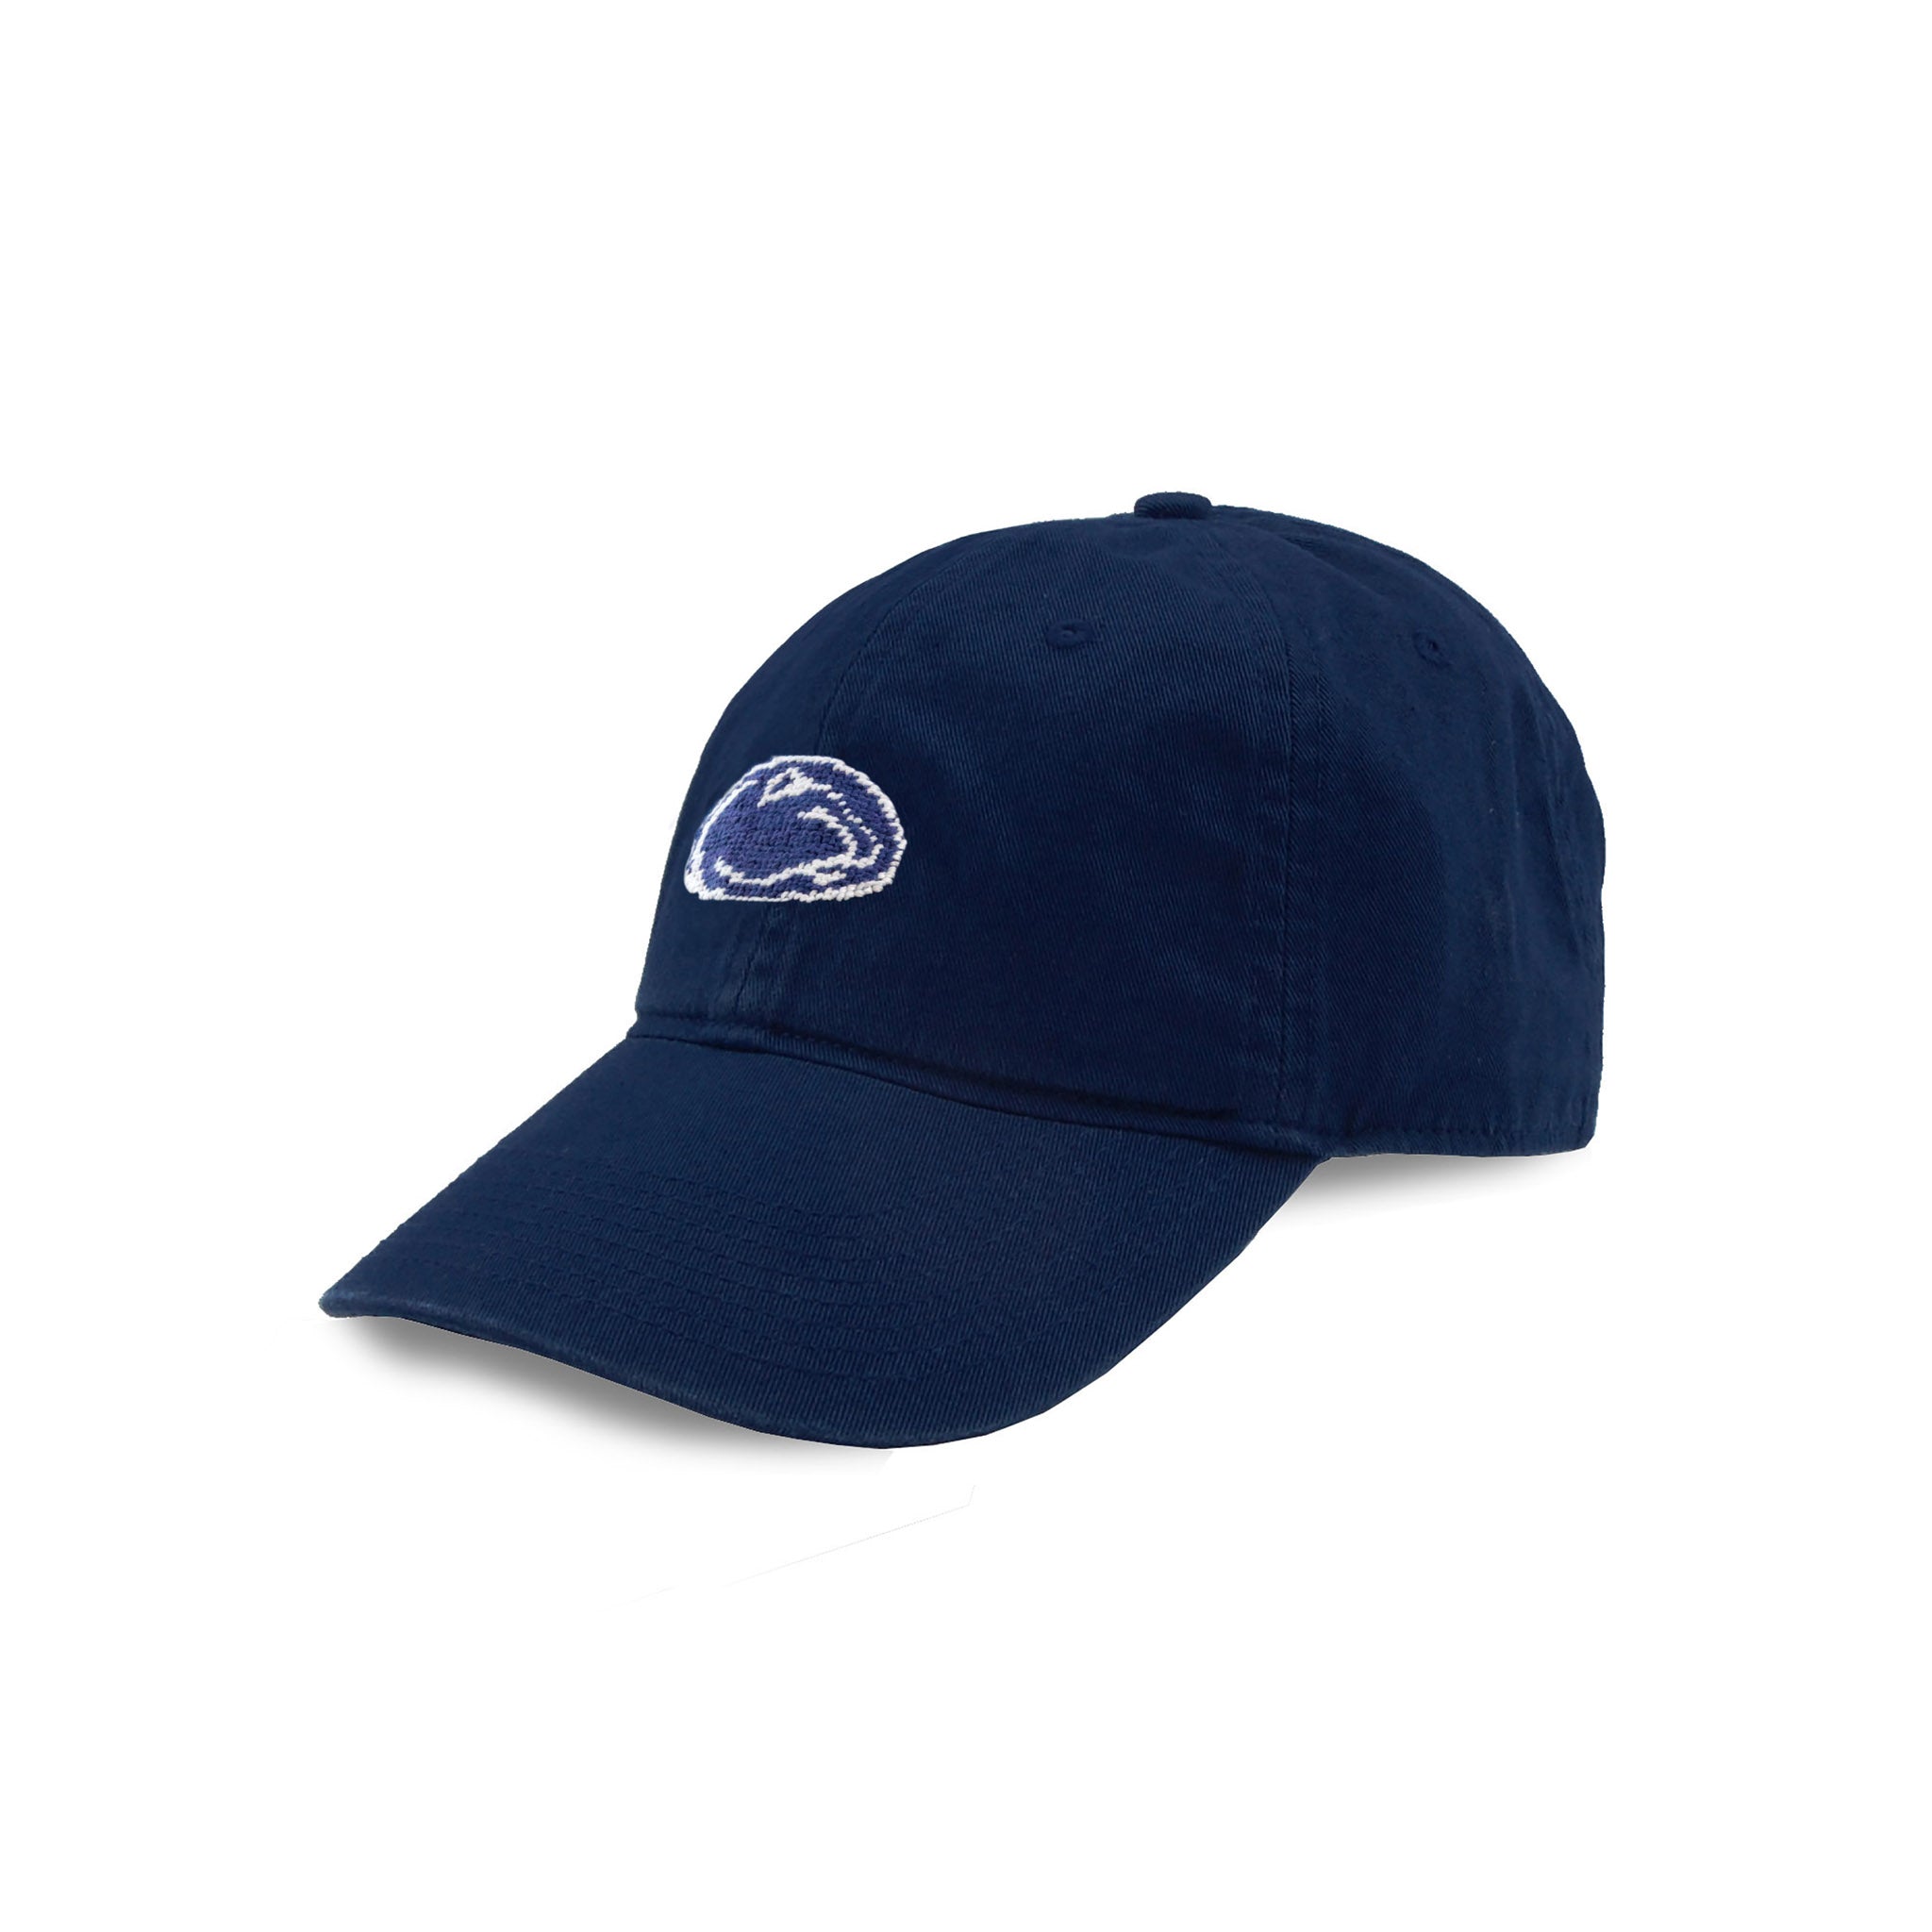 Penn State Hat (Navy) at Smathers and Branson